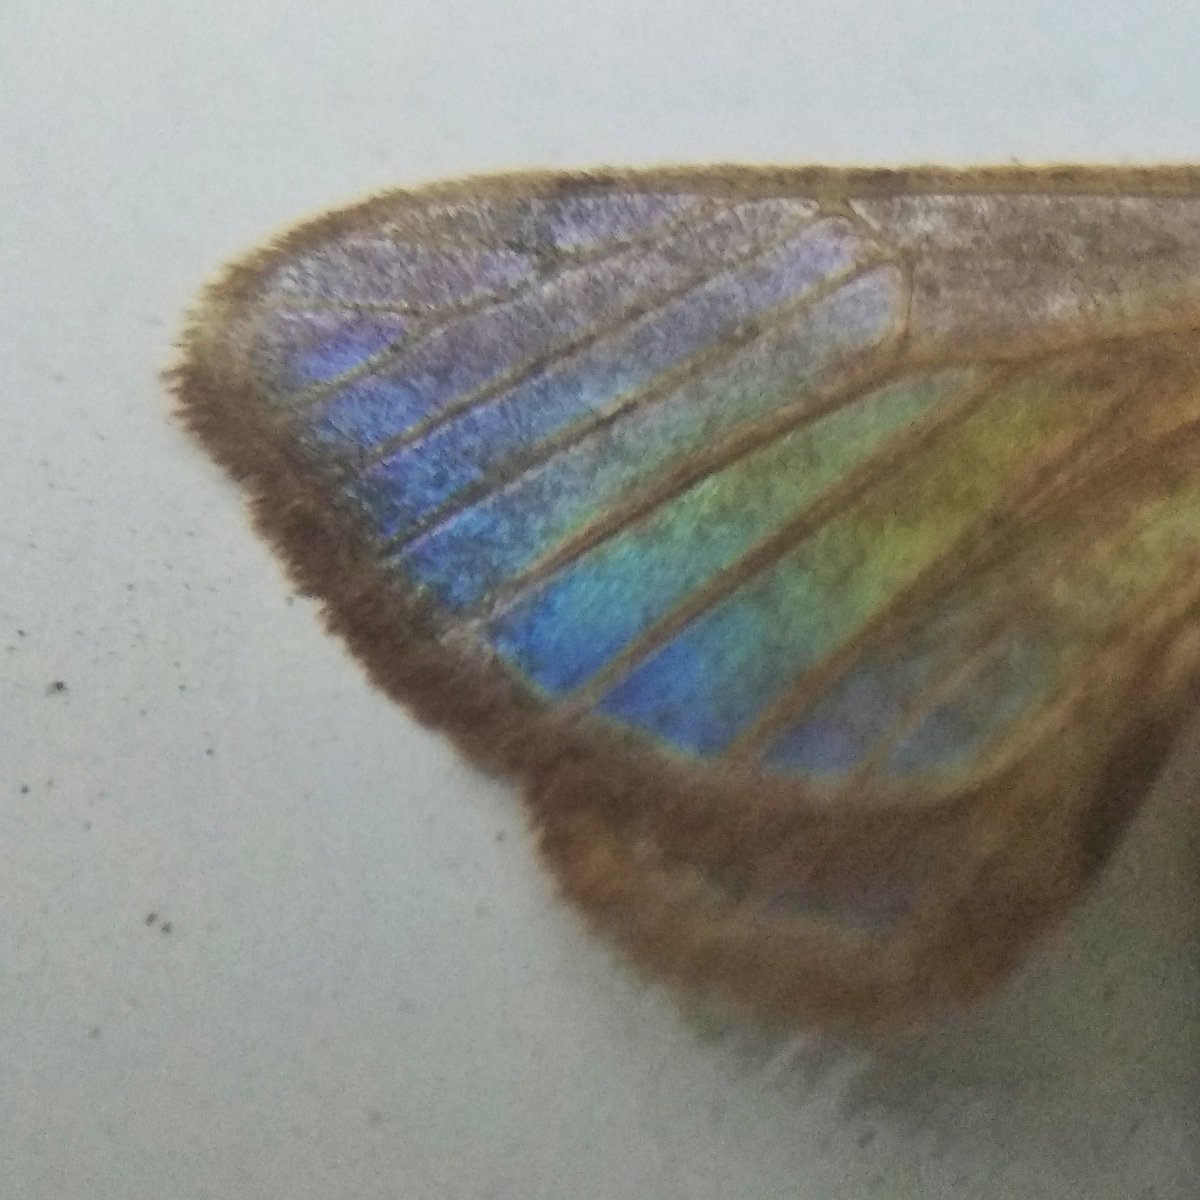 A thread abt mystery of colour on a moth's wing: near d stairs in my building I found a dead moth. Out of habit I picked it up n brought home. Colour pattern on its wings caught my attention. It was subtle n looked pretty. I thought of seeing it under Foldscope...  #scicomm (1/n)